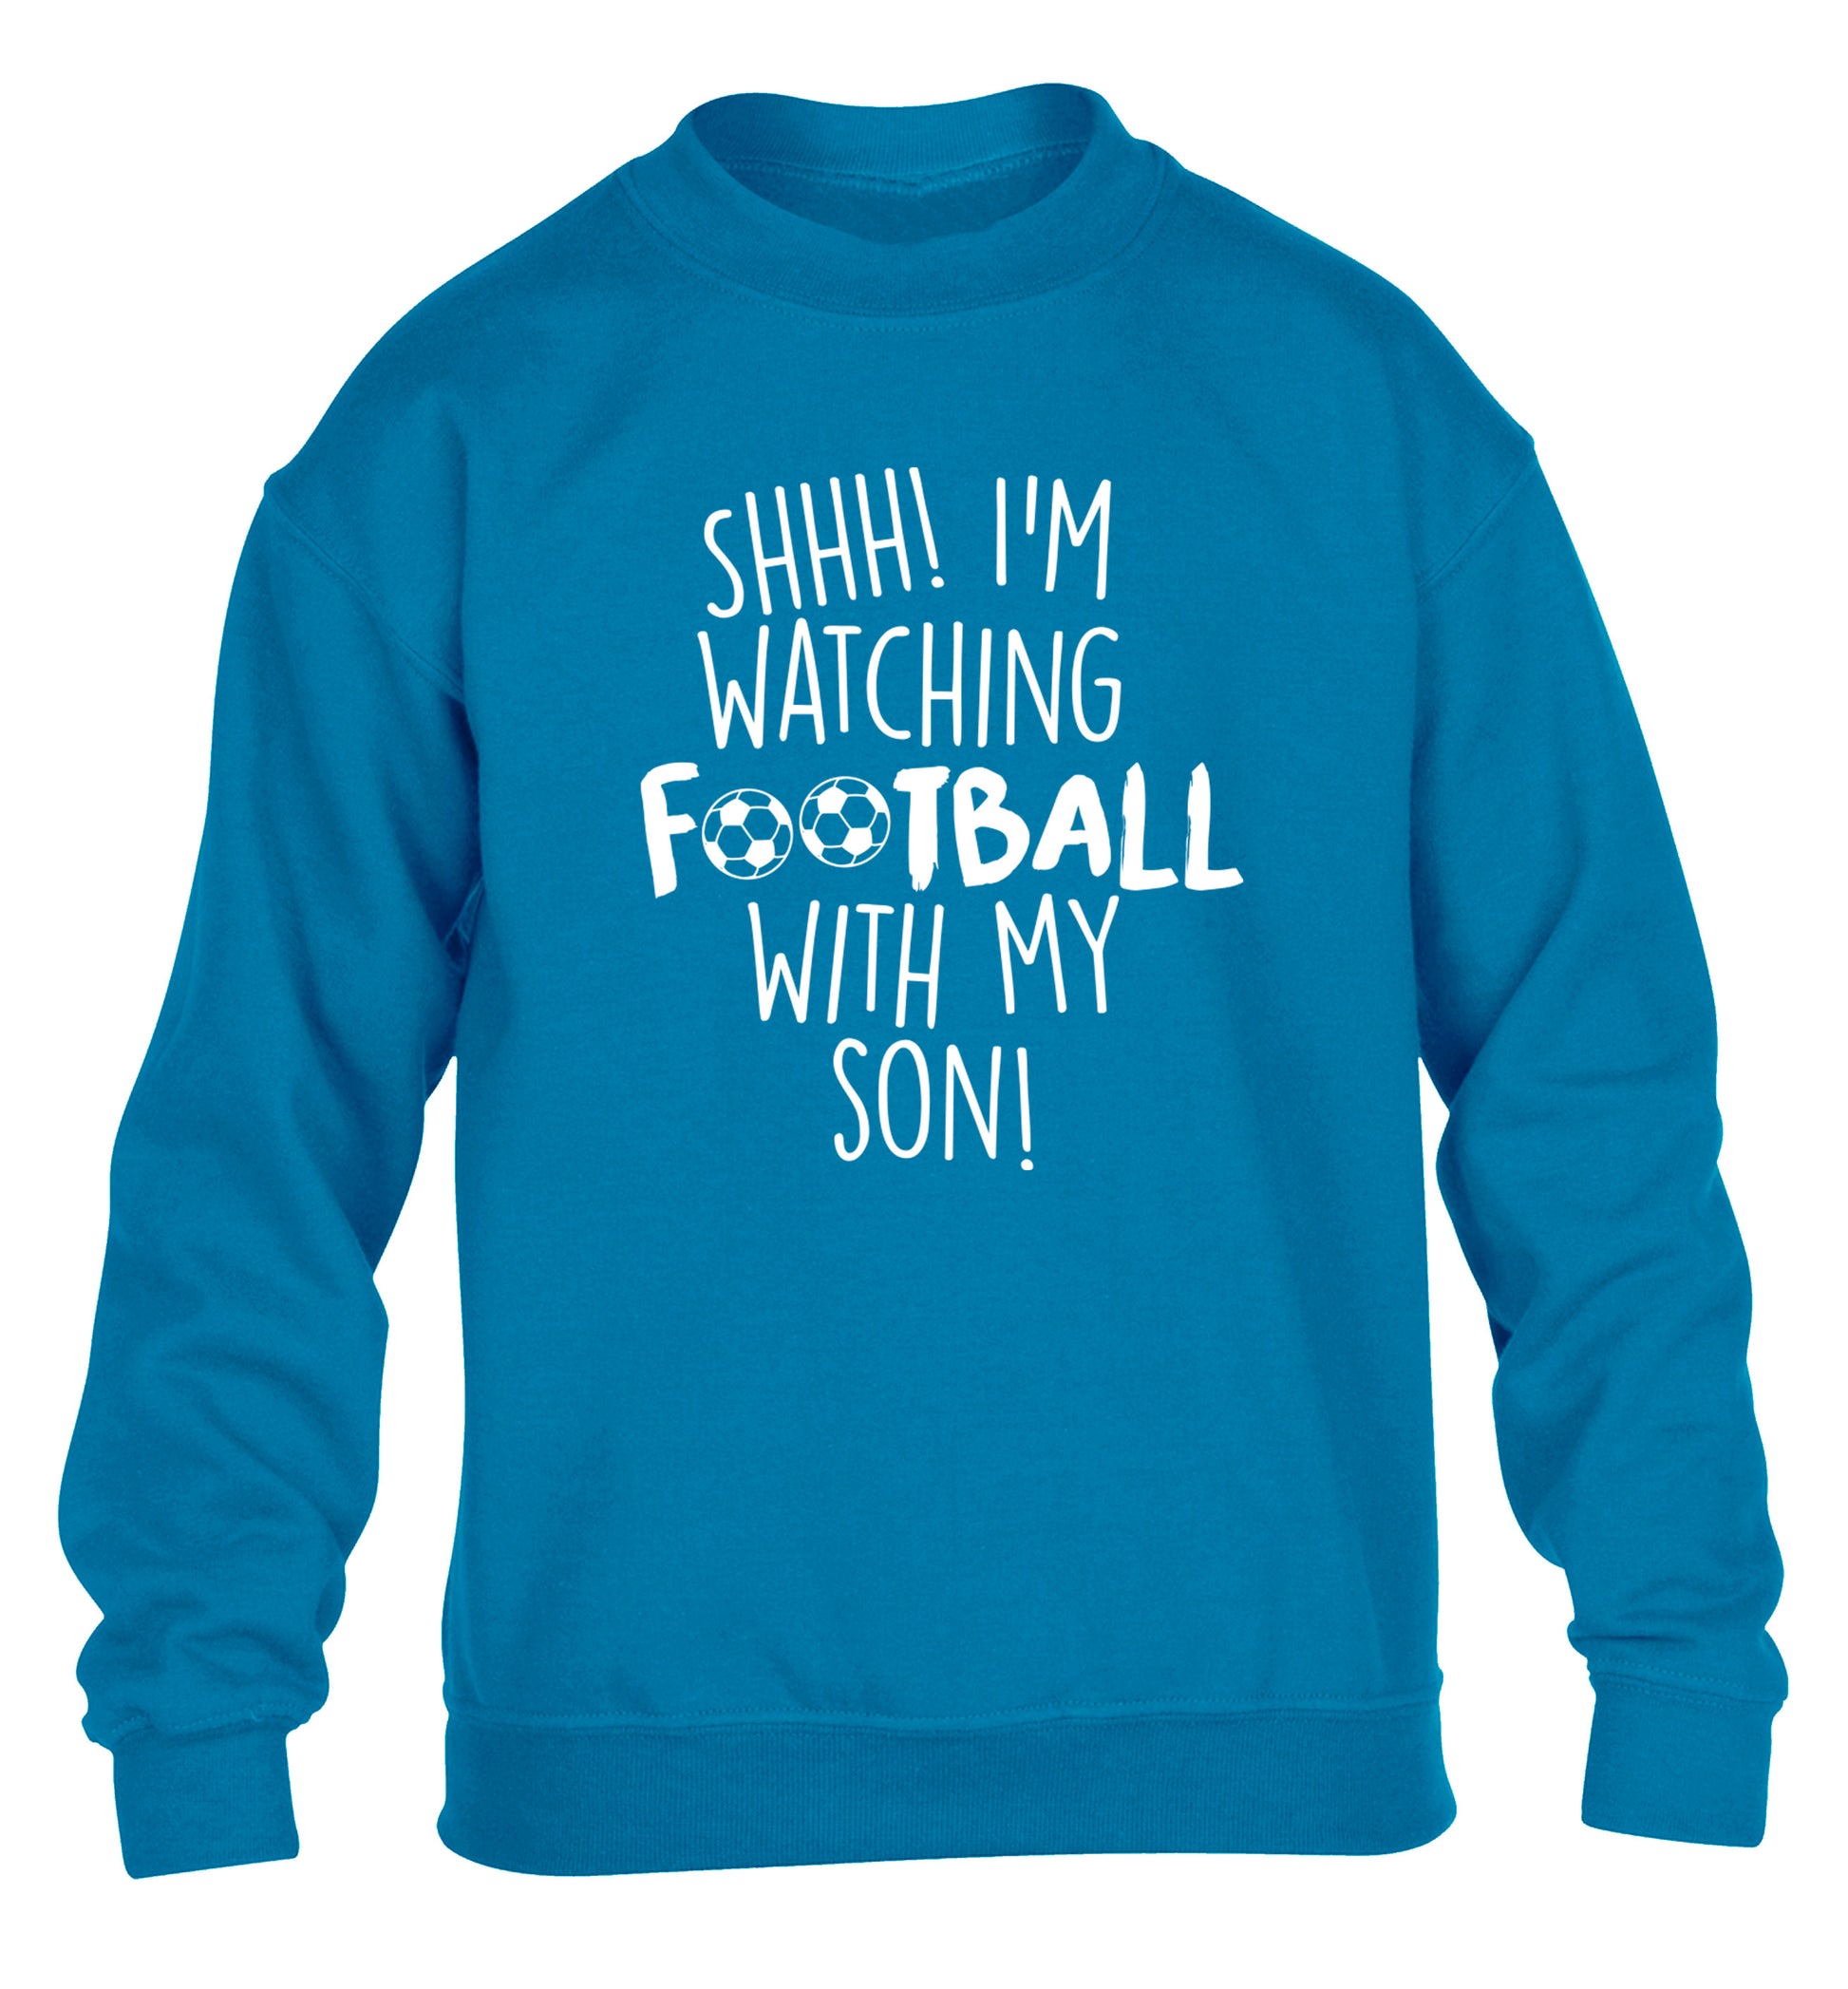 Shhh I'm watching football with my son children's blue sweater 12-14 Years